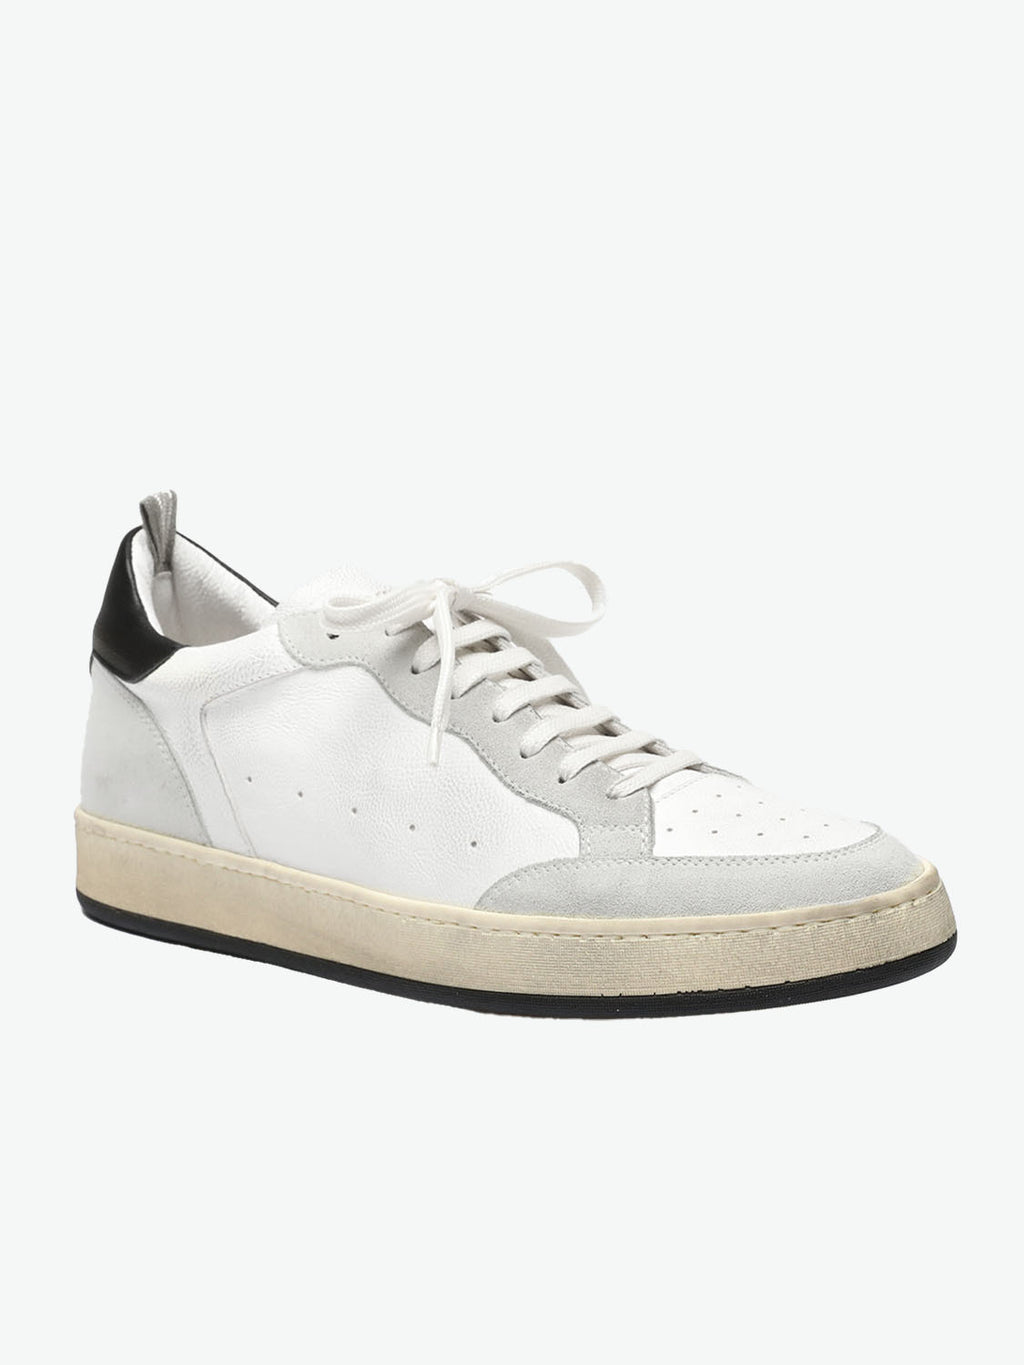 Officine Creative Magic 001 White Leather Low Top Sneakers